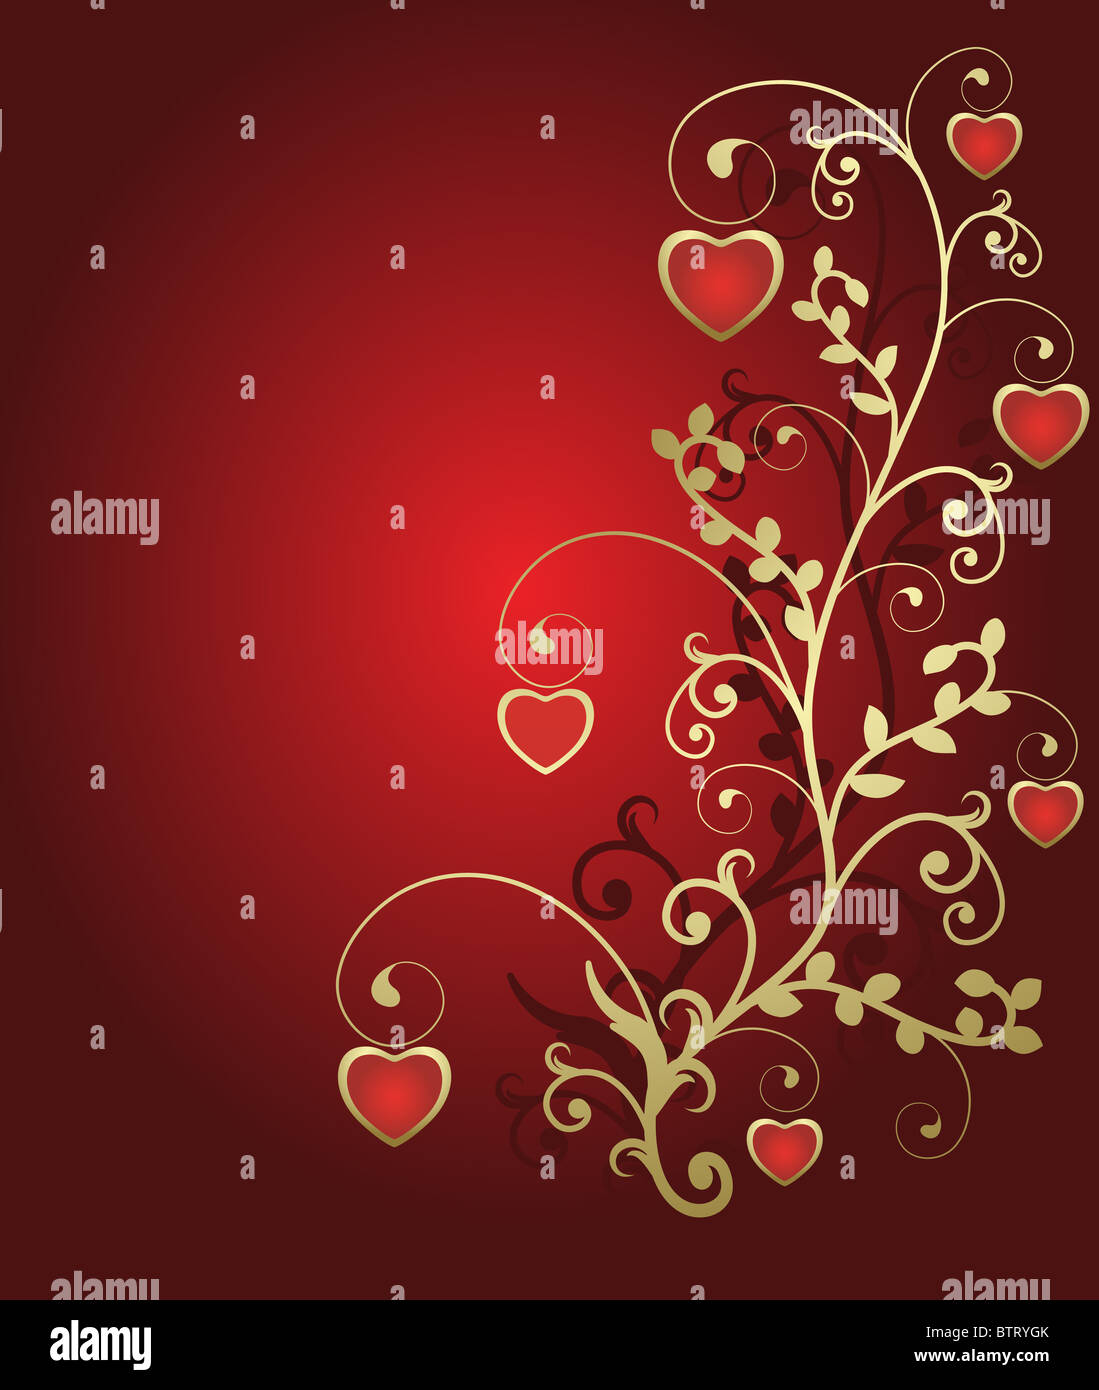 abstract floral heart with place for your text Stock Photo